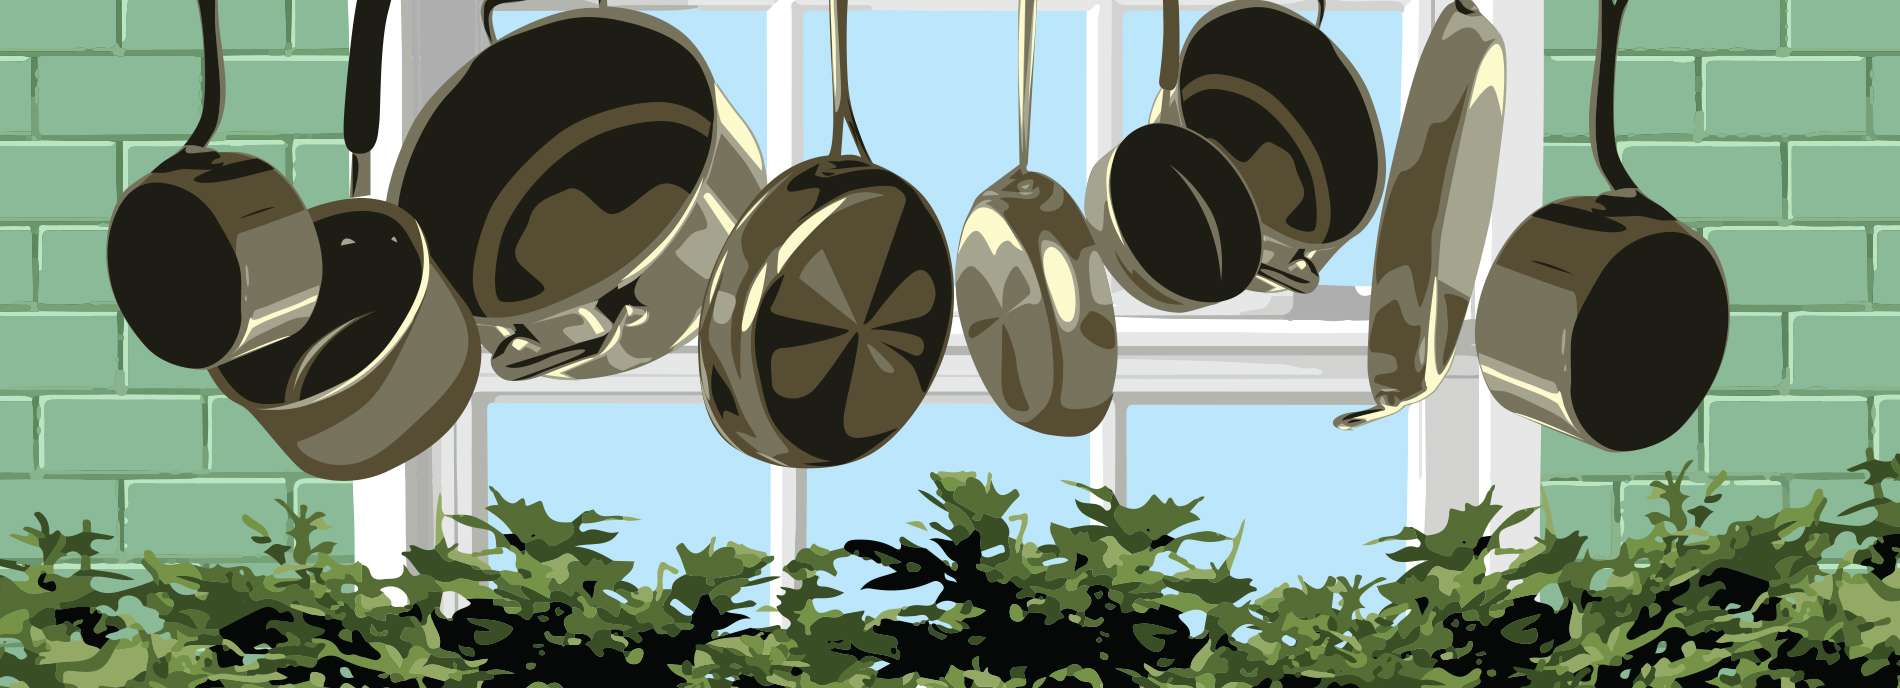 Image of pots and pans hanging from the ceiling. This is meant to be a visual pun, because marijuana is also known as 'pot'.